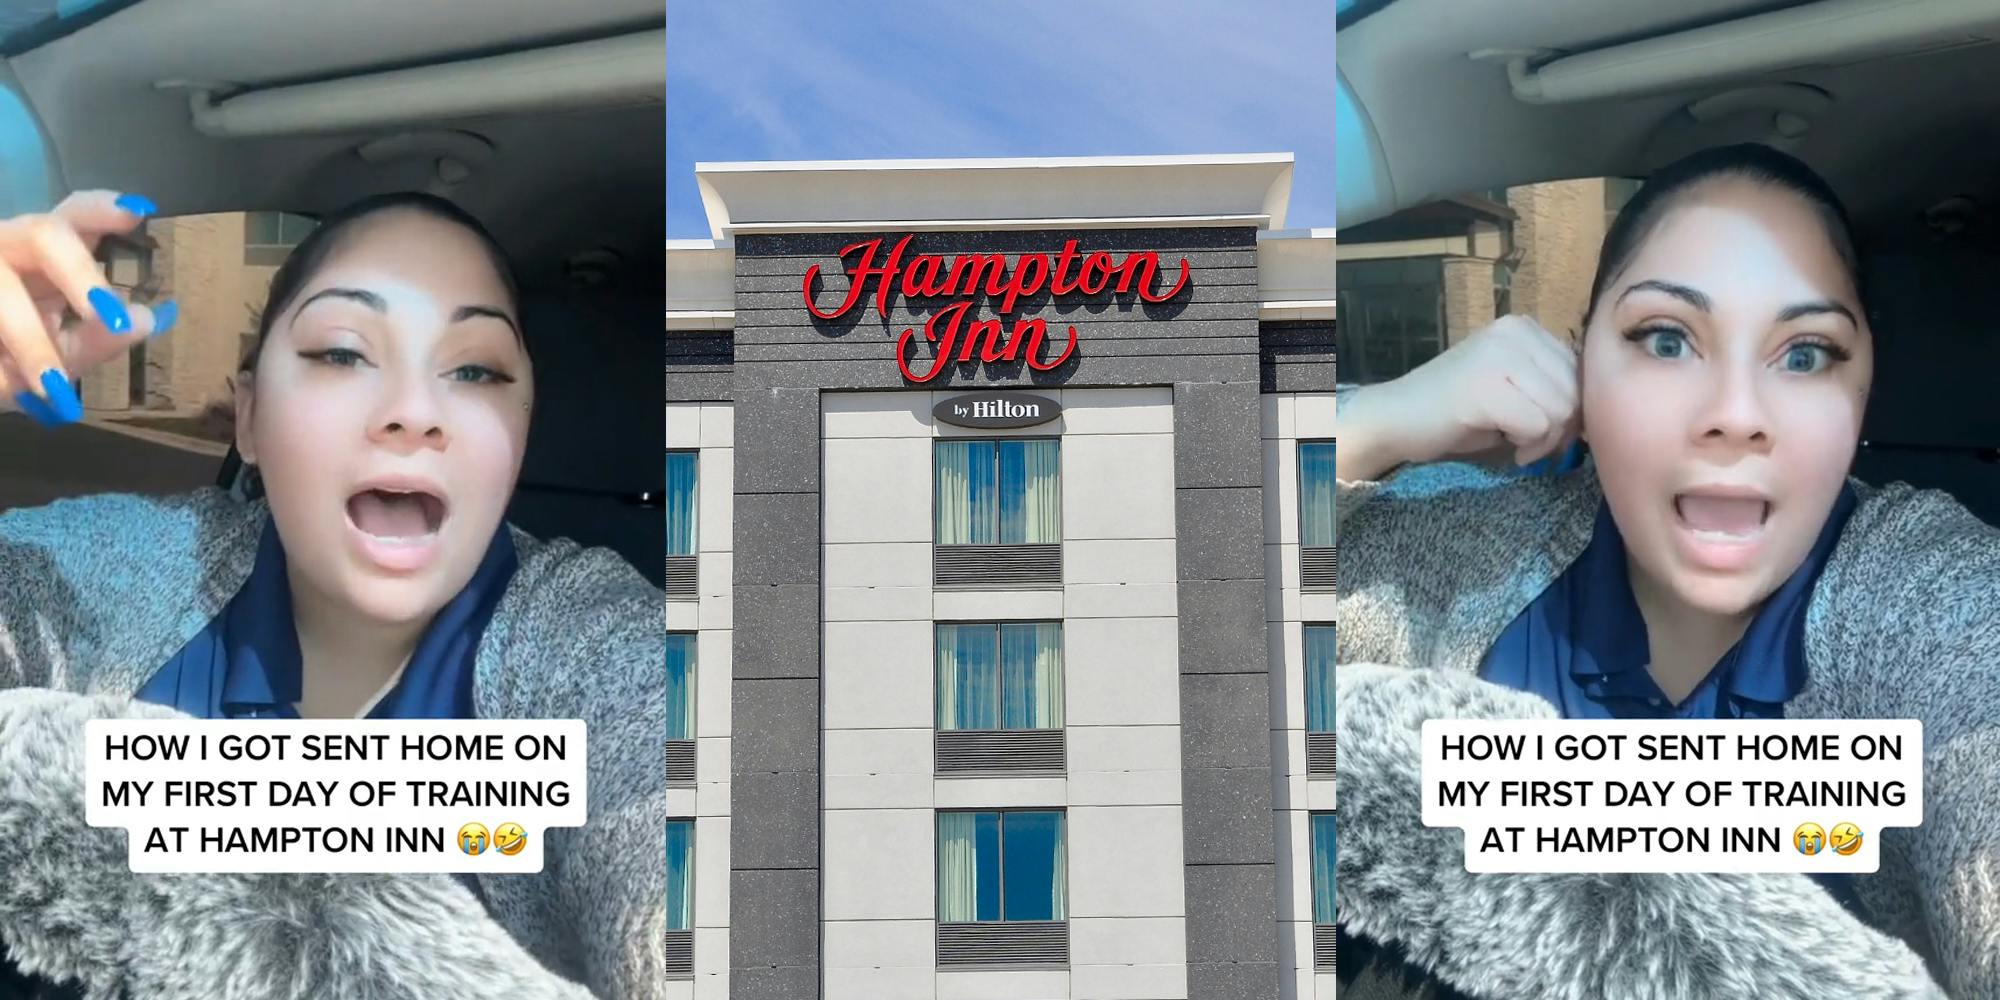 Hampton Inn worker speaking in car with caption "HOW I GOT SENT HOME O MY FIRST DAY OF TRAINING AT HAMPTON INN" (l) Hampton Inn building with sign (c) Hampton Inn worker speaking in car with caption "HOW I GOT SENT HOME O MY FIRST DAY OF TRAINING AT HAMPTON INN" (r)